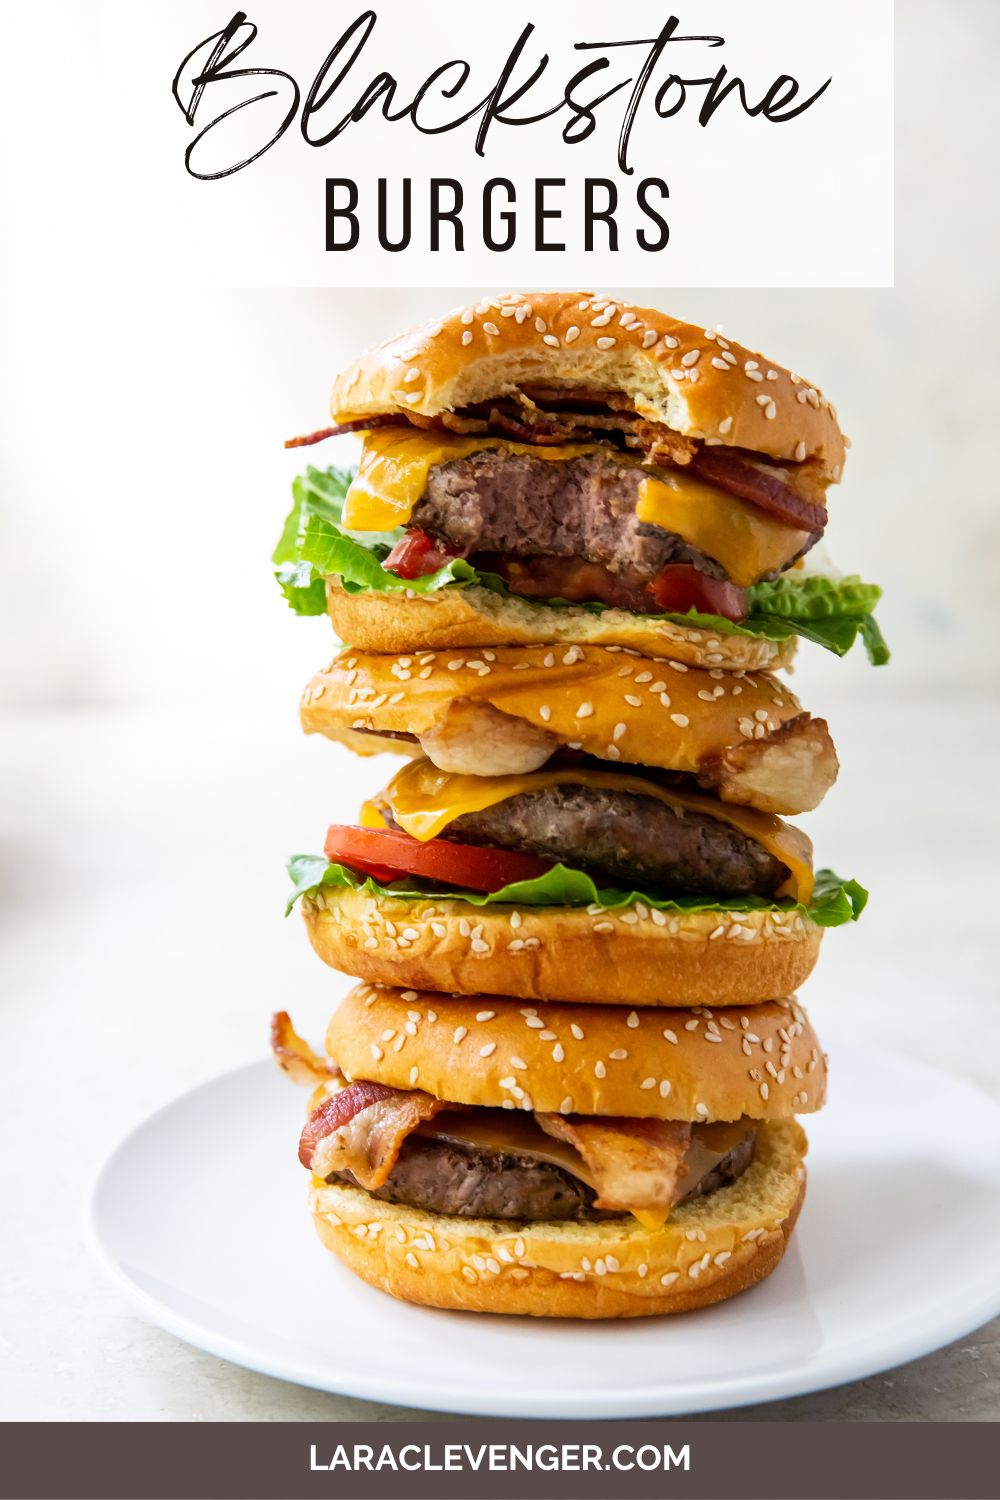 PINTERST IMAGE OF 3 CHEESEBURGERS WITH TOPPINGS BEING STACKED ON TOP OF EACH OTHER